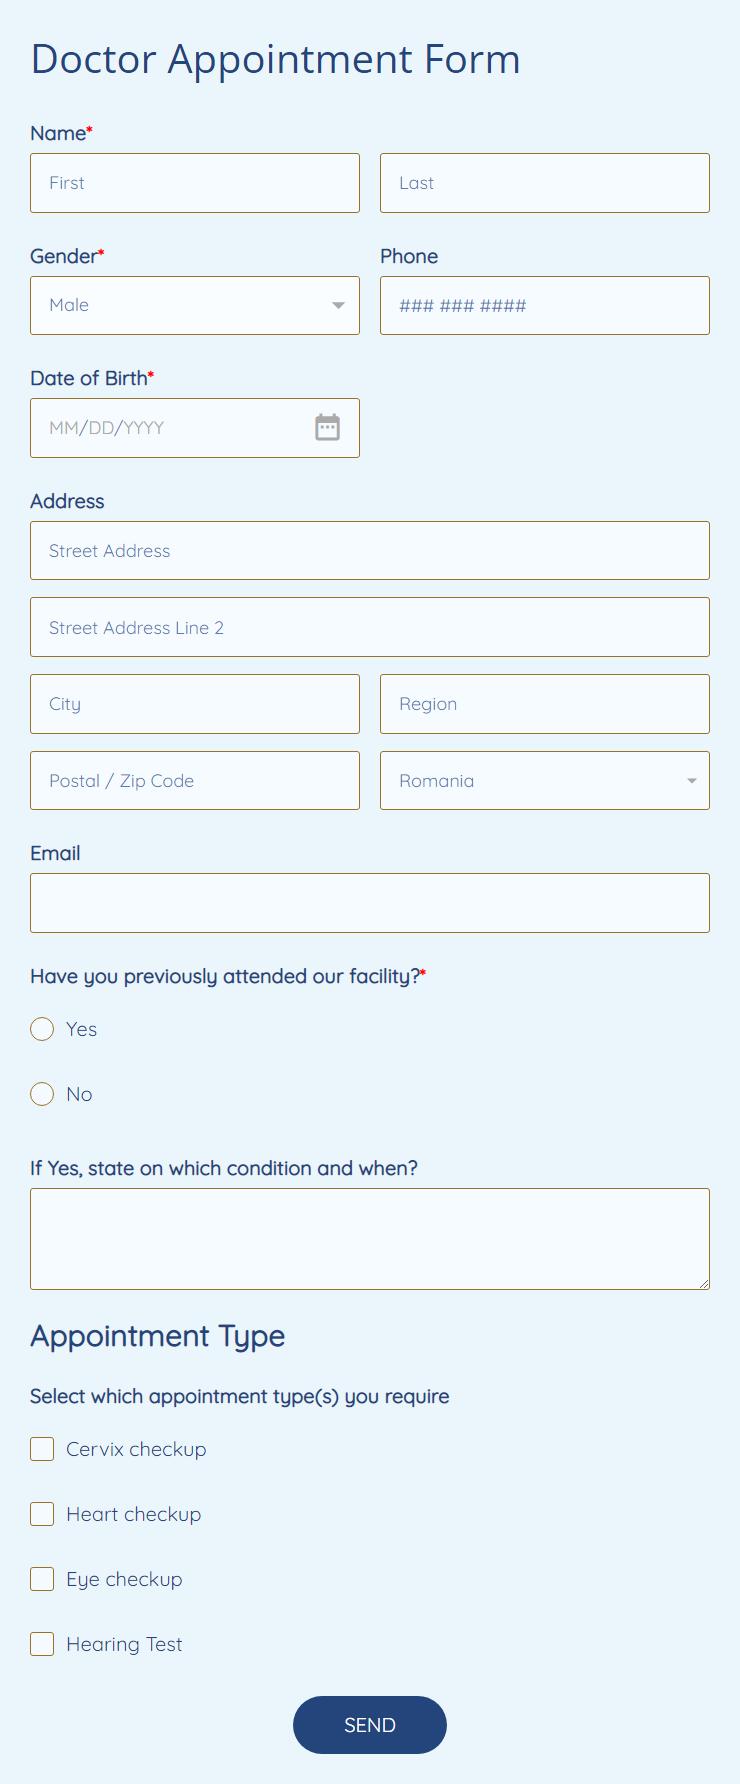 doctor appointment form template free download